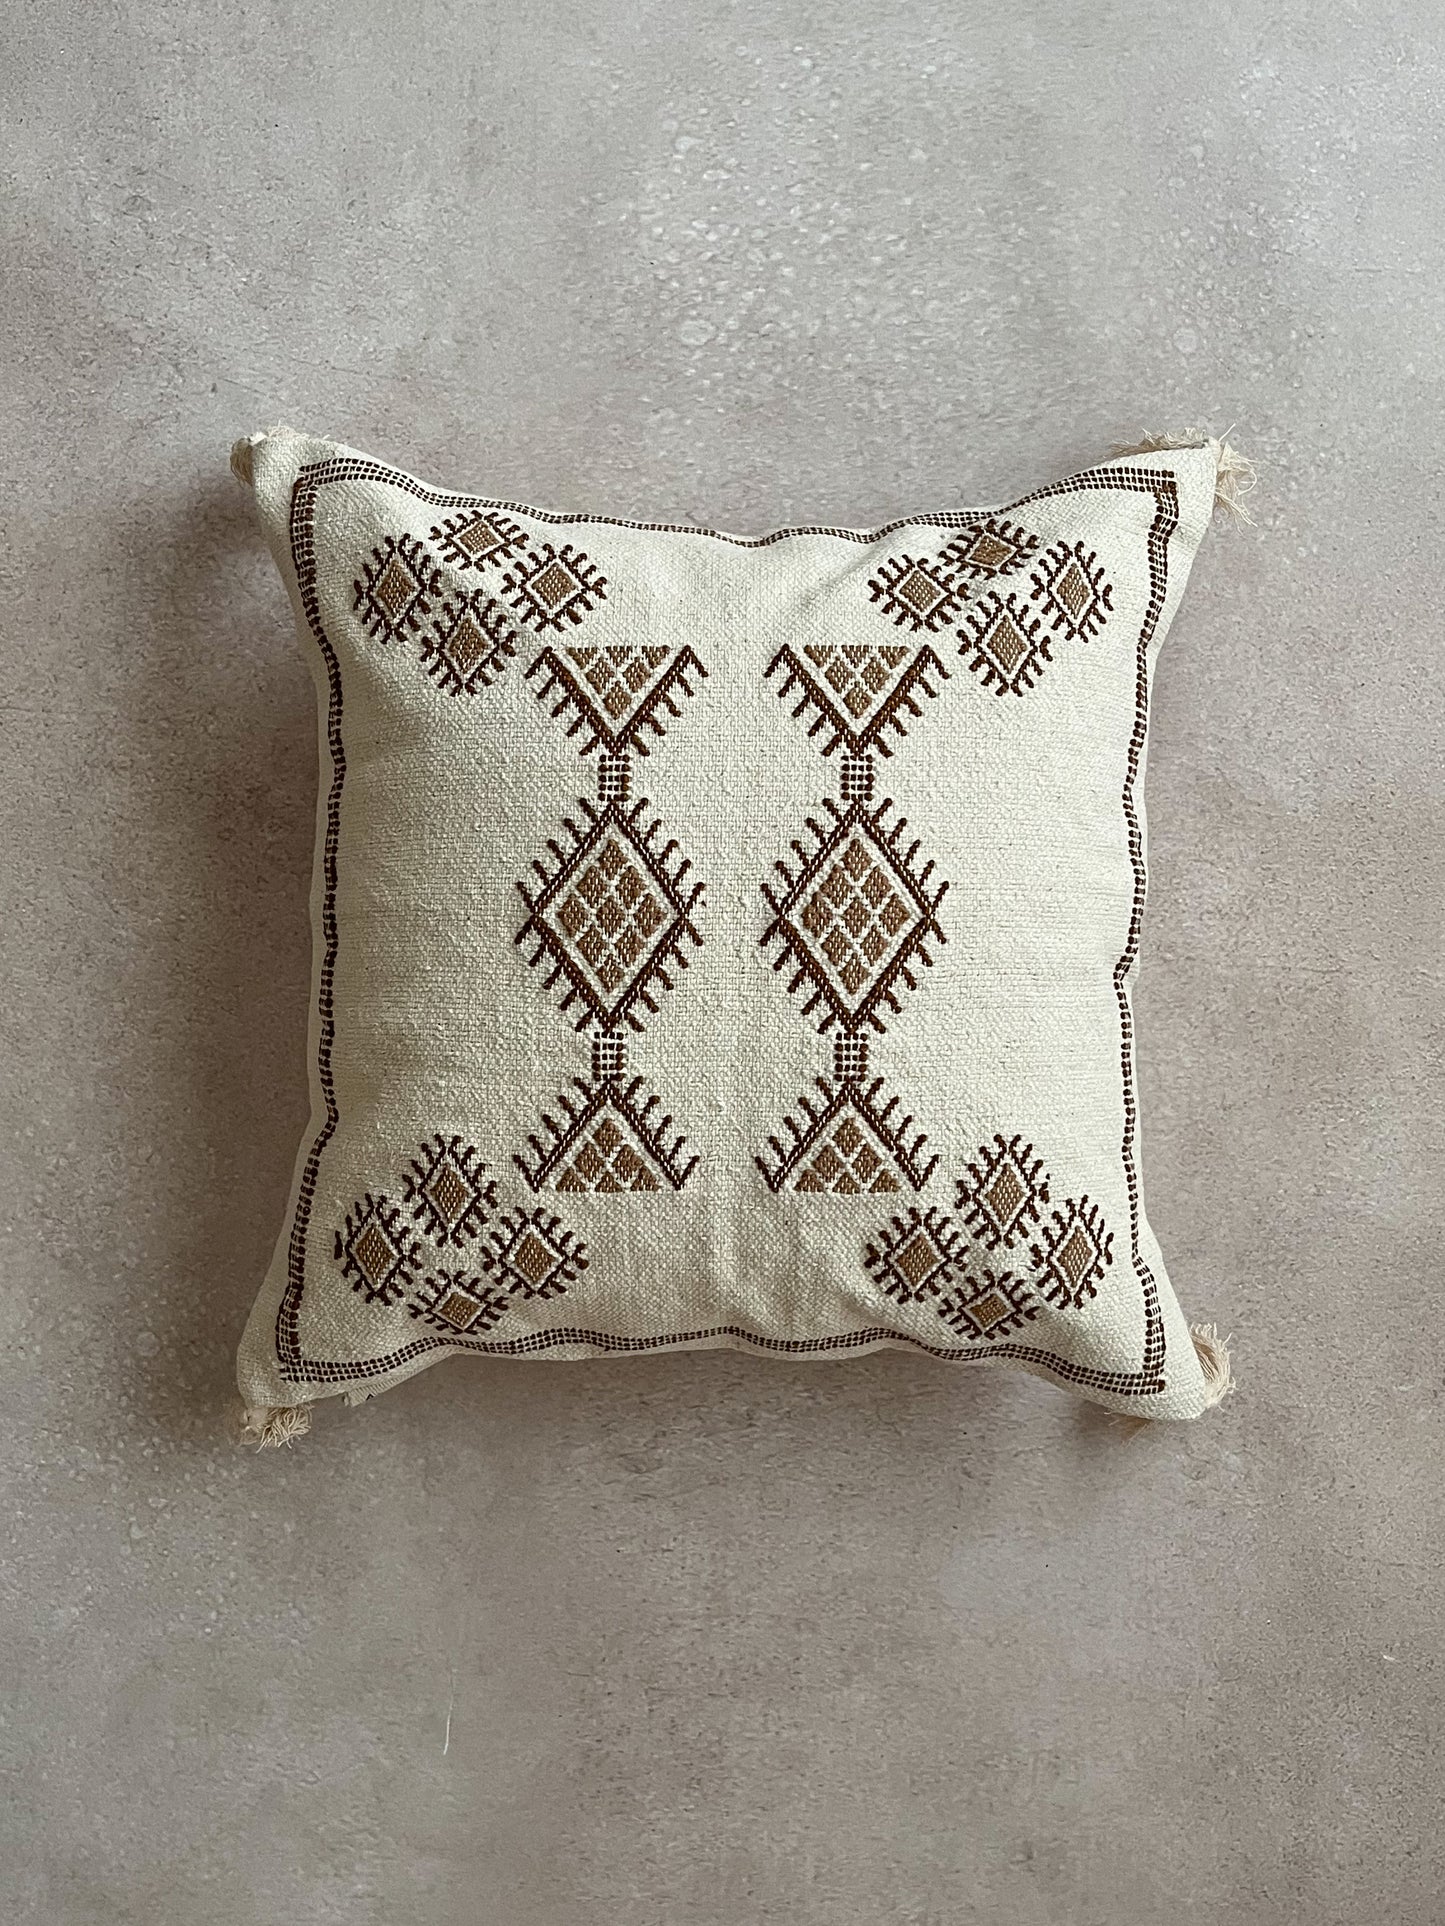 White or Cream colored cushion with embroidery